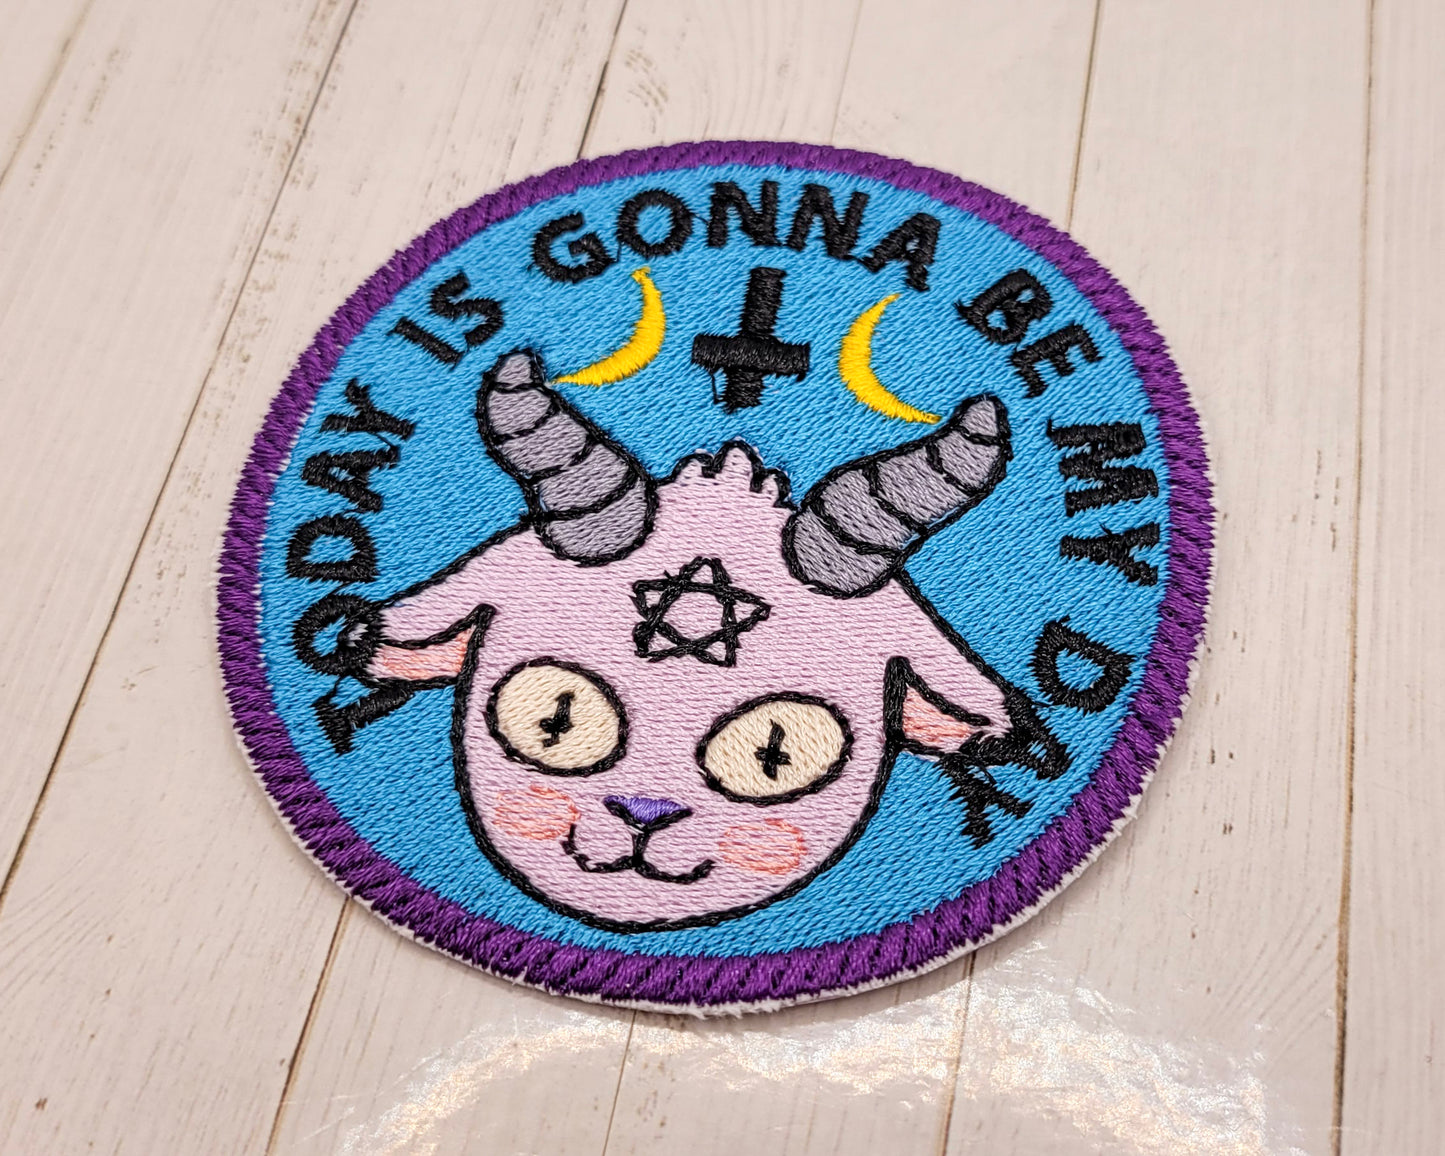 Today Is Gonna Be My Day Embroidered Patch